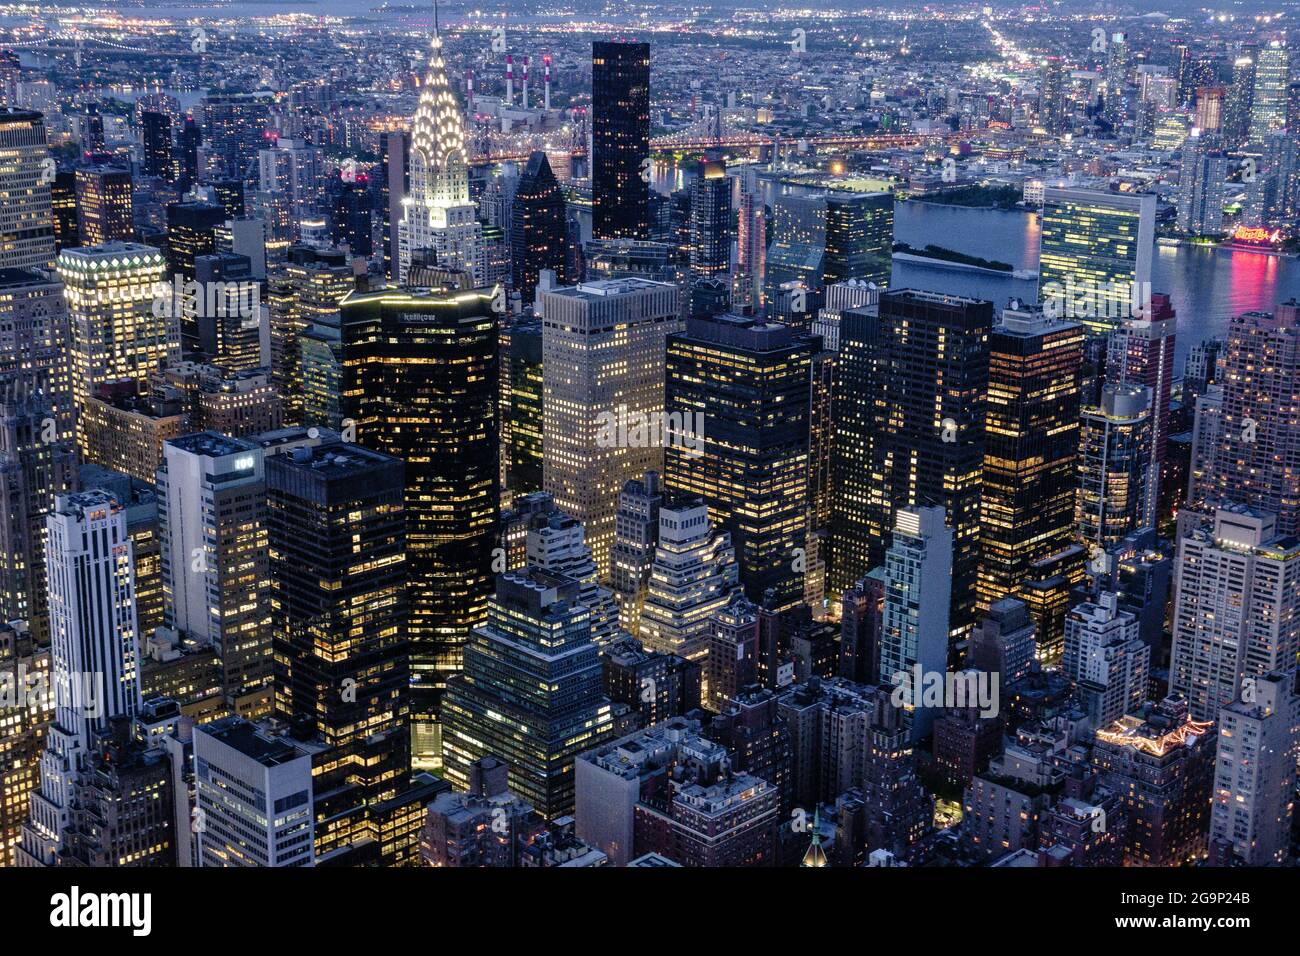 view of manhattan at night from the empire state building Stock Photo